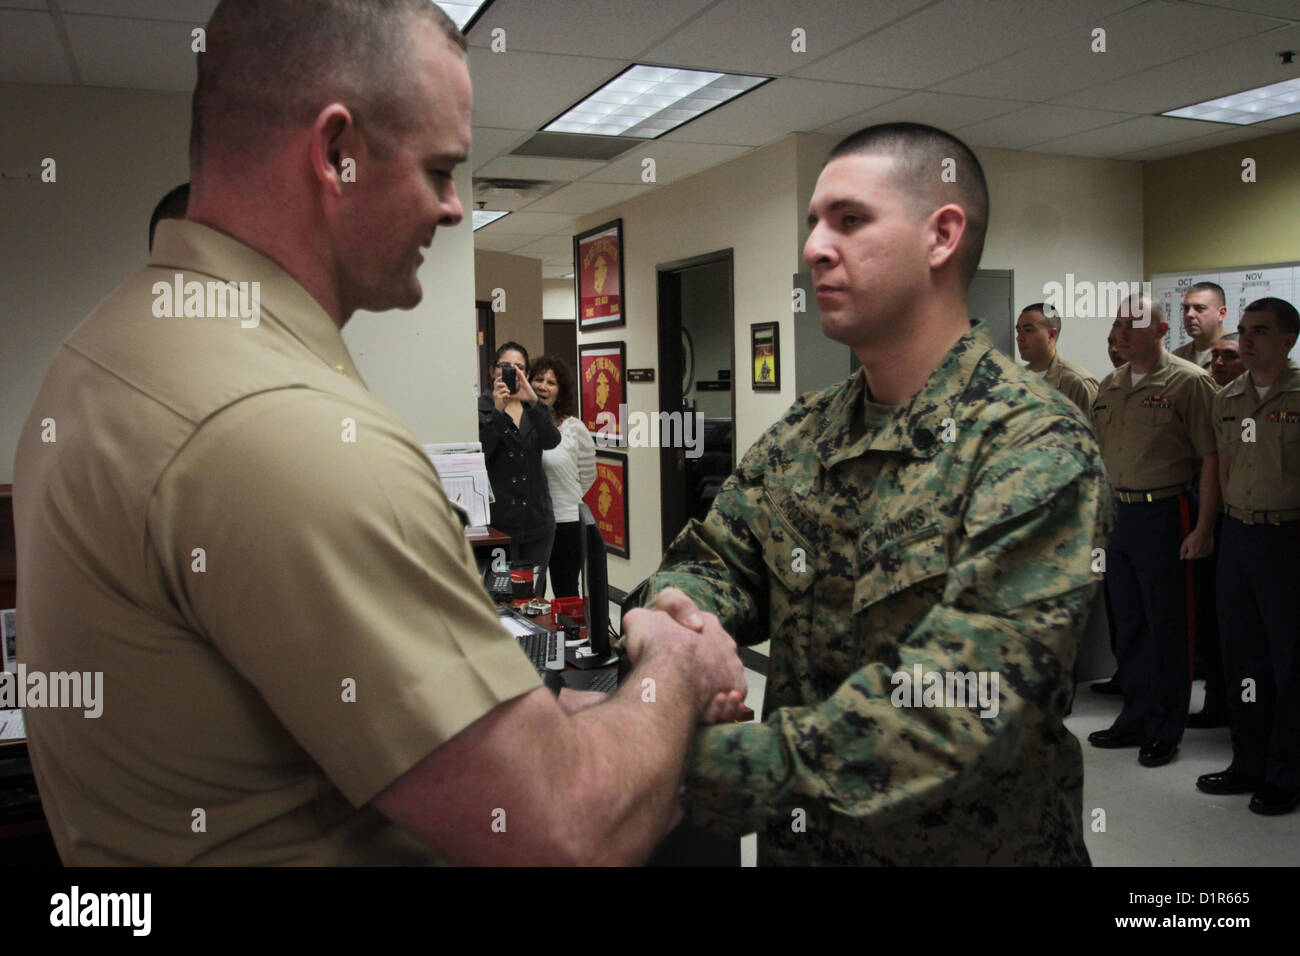 Maj. Steven M. Ford, commanding officer of Marine Corps Recruiting Station Phoenix, congratulates Staff Sgt. Hector E. Orozco, upon being meritoriously promoted from sergeant to staff sergeant during a ceremony at the R.S. Phoenix Headquarters in Phoenix, Jan. 2, 2013. Orozco, a native of Los Angeles, and an aircraft electronic countermeasures systems technician by trade, has been a recruiter in the Phoenix region since July, 2011. 'To get promoted is one thing. Everybody out here on recruiting duty is hand selected and personally screened, so you're already dealing with an A-List group of peo Stock Photo